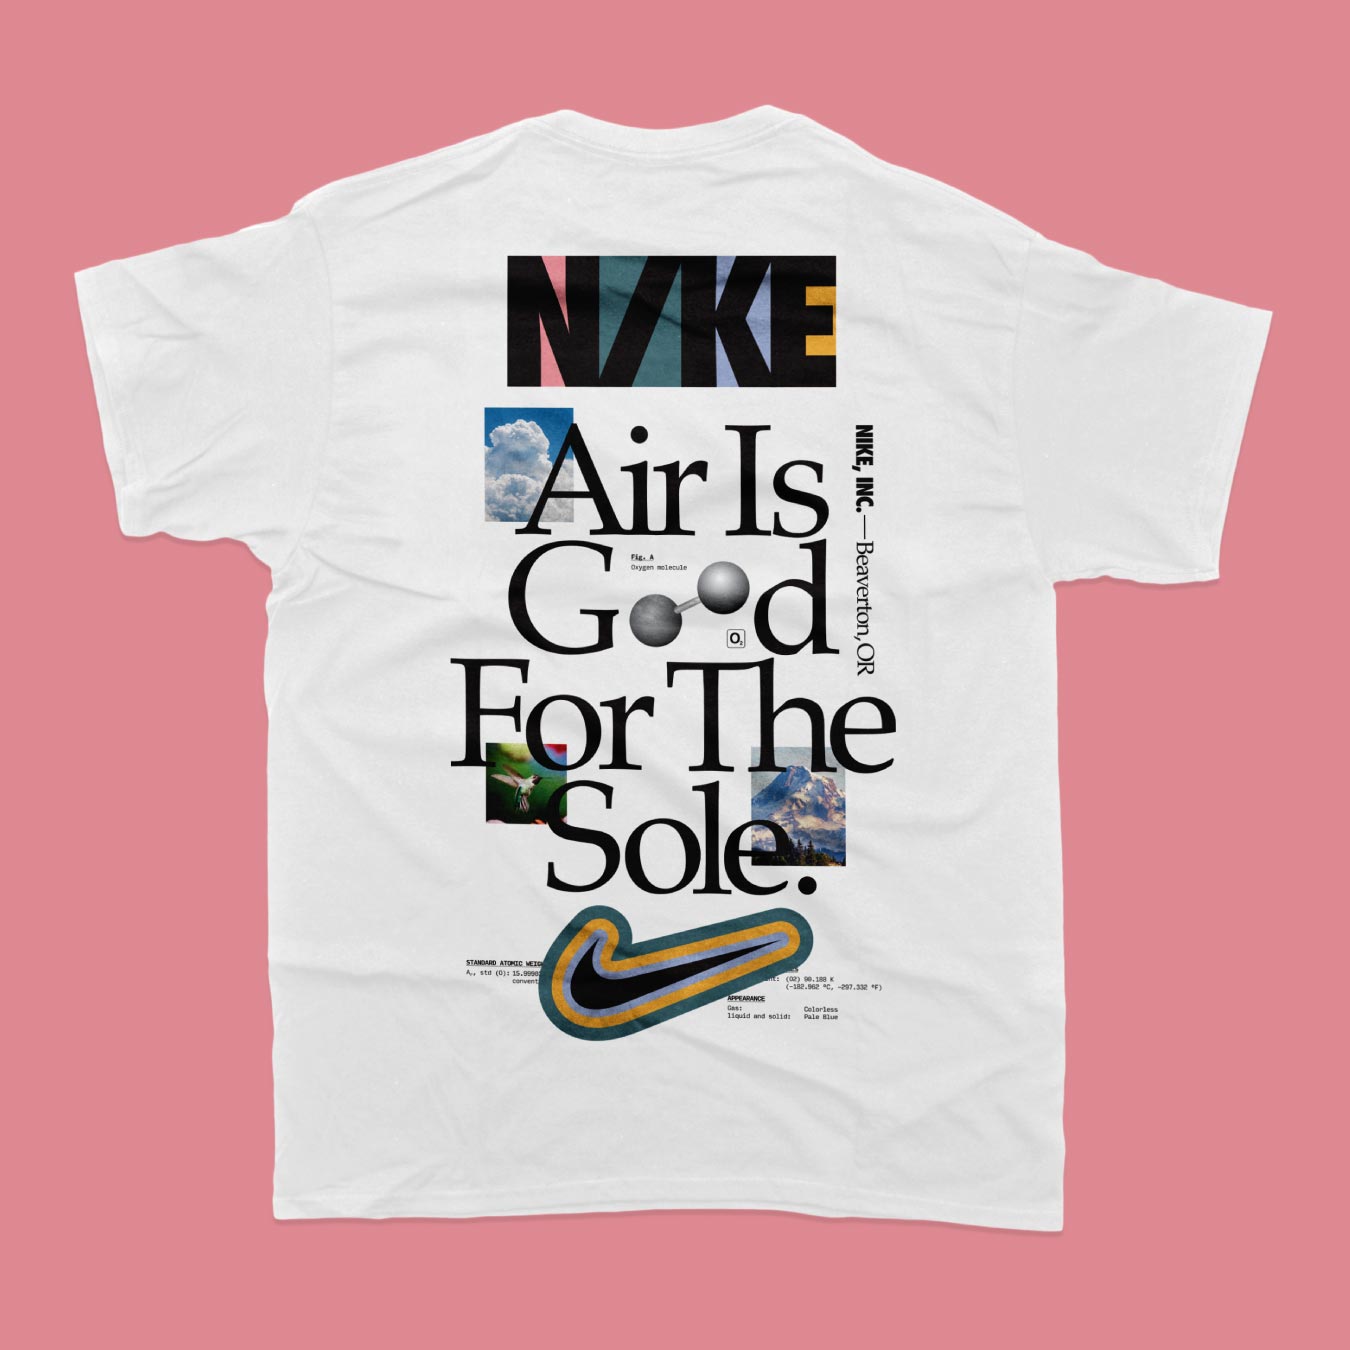 Nike-Art-Project-Air-Is-Good-For-The-Sole